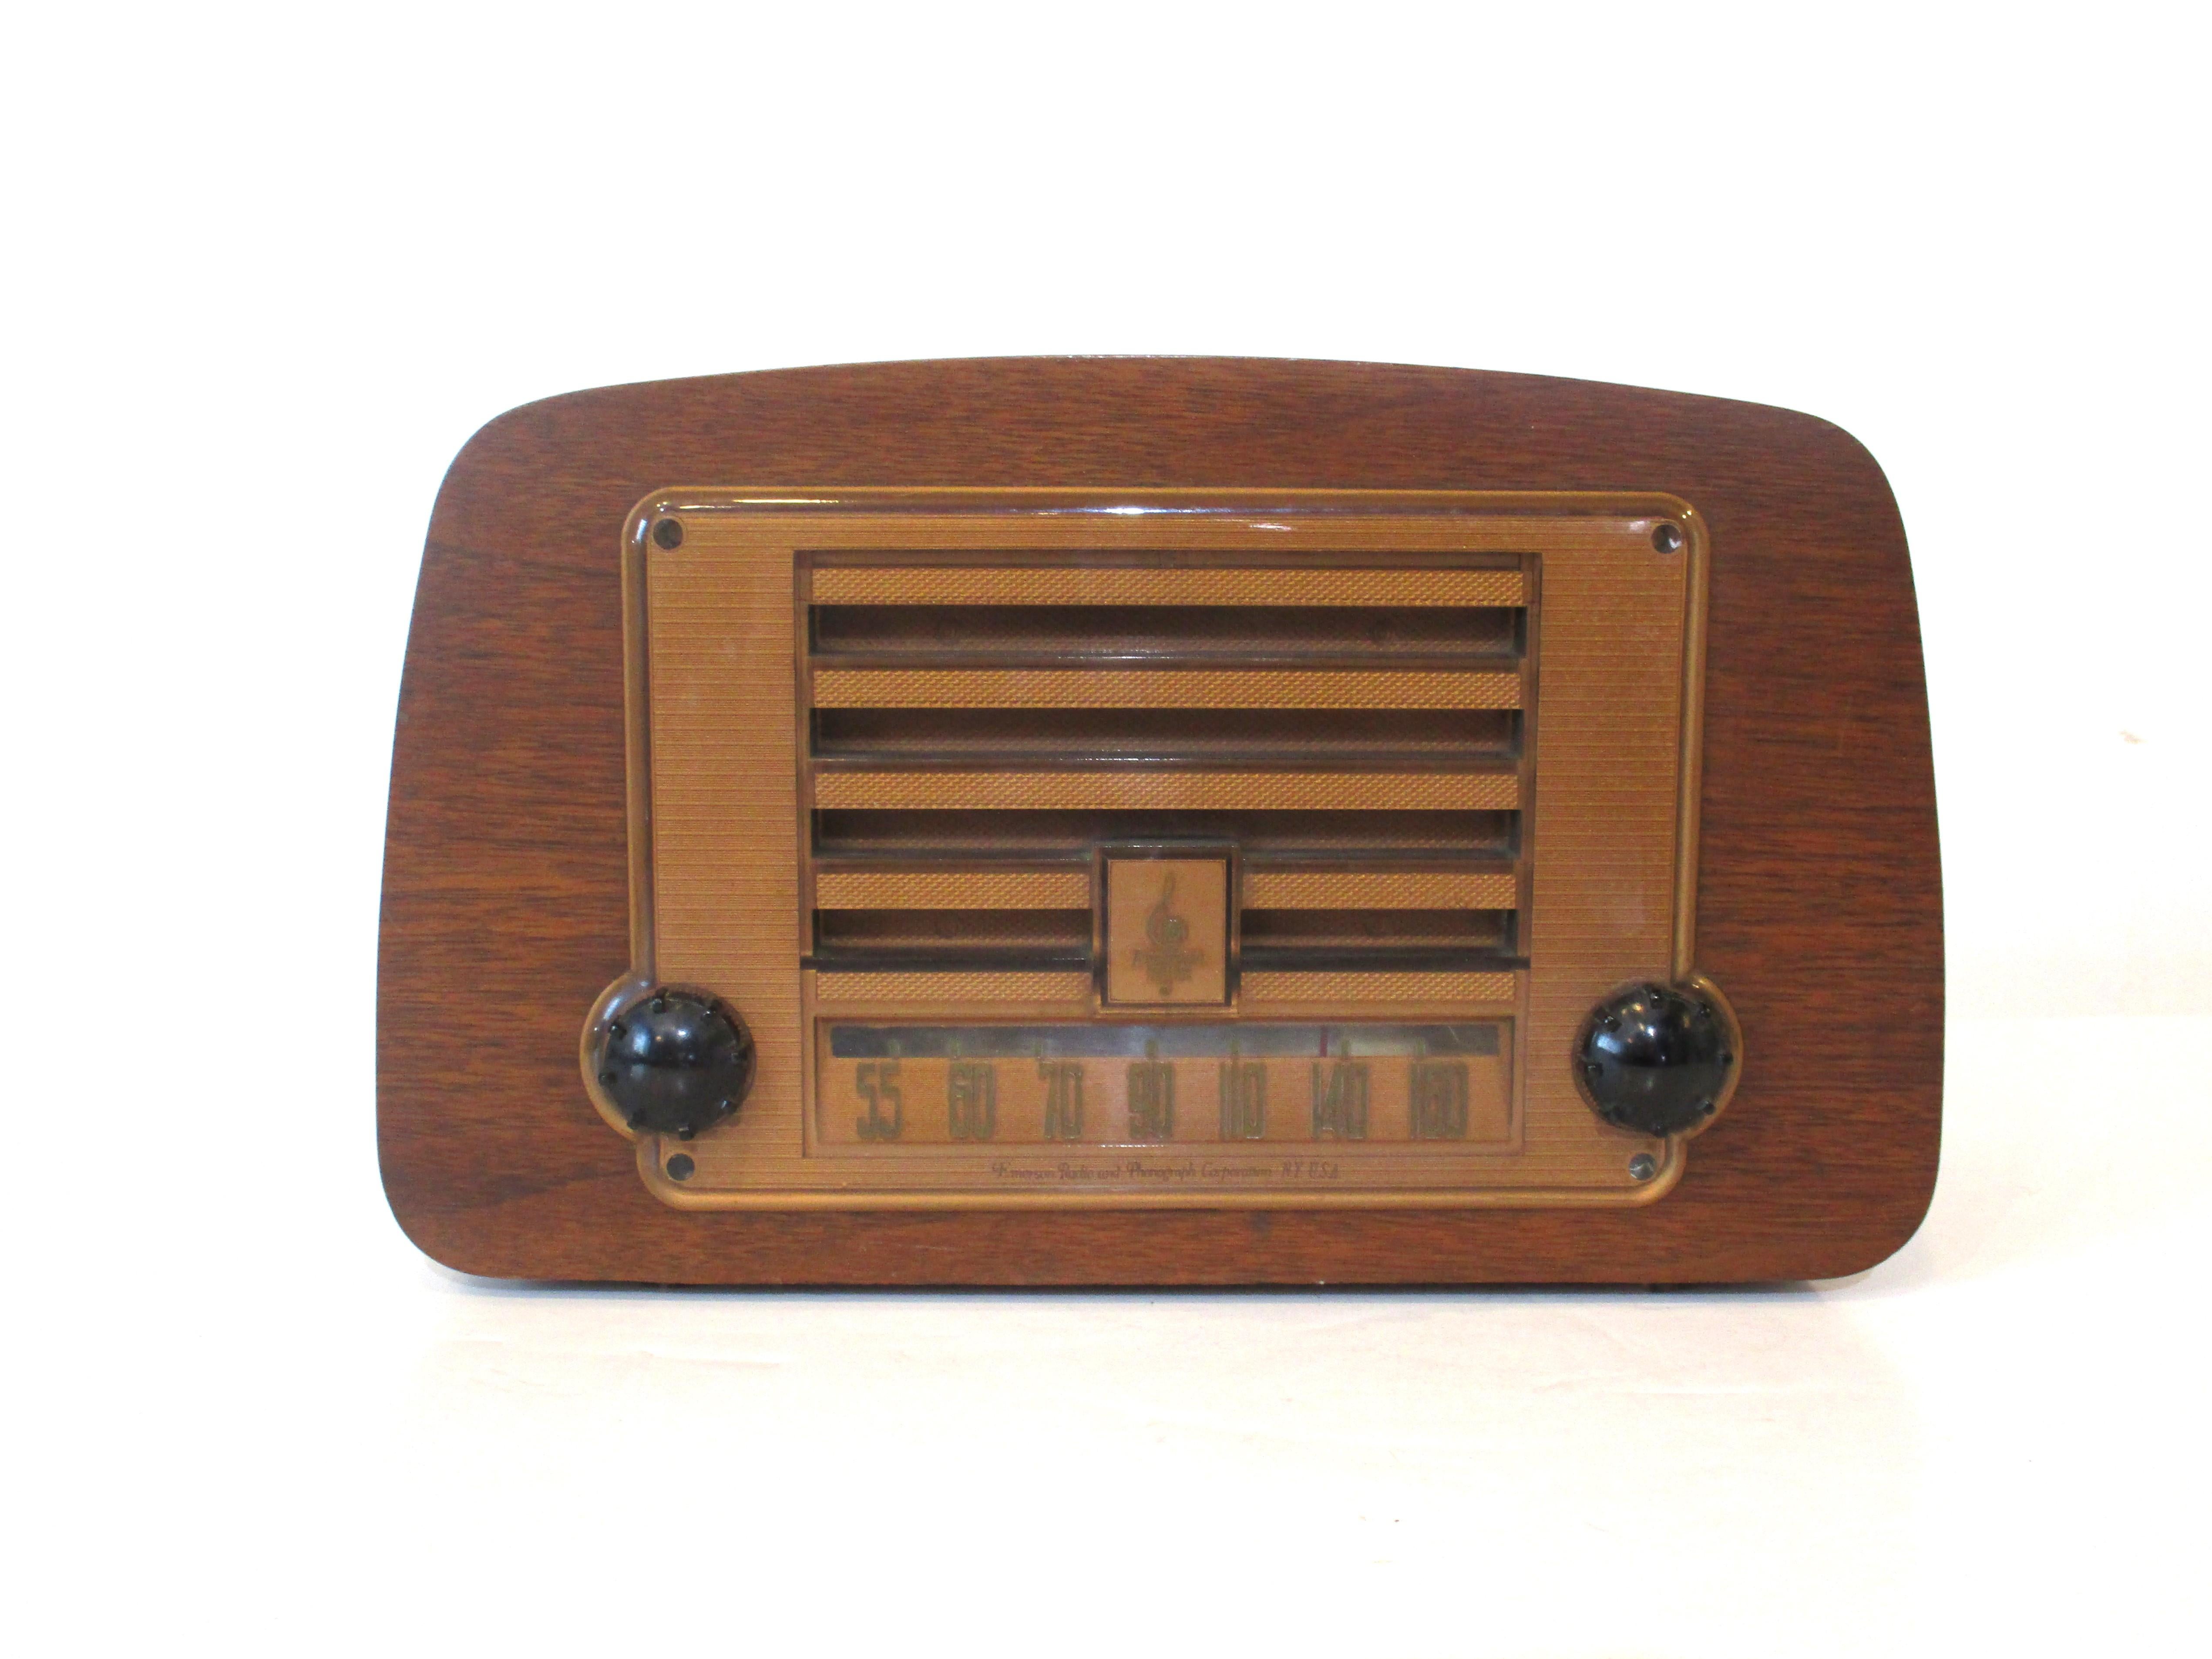 A walnut bent wood ply formed radio with colored plastic grill and knobs designed by the iconic team of Ray and Charles Eames. The couple designed some industrial items before their well known collaboration with the Herman Miller furniture company